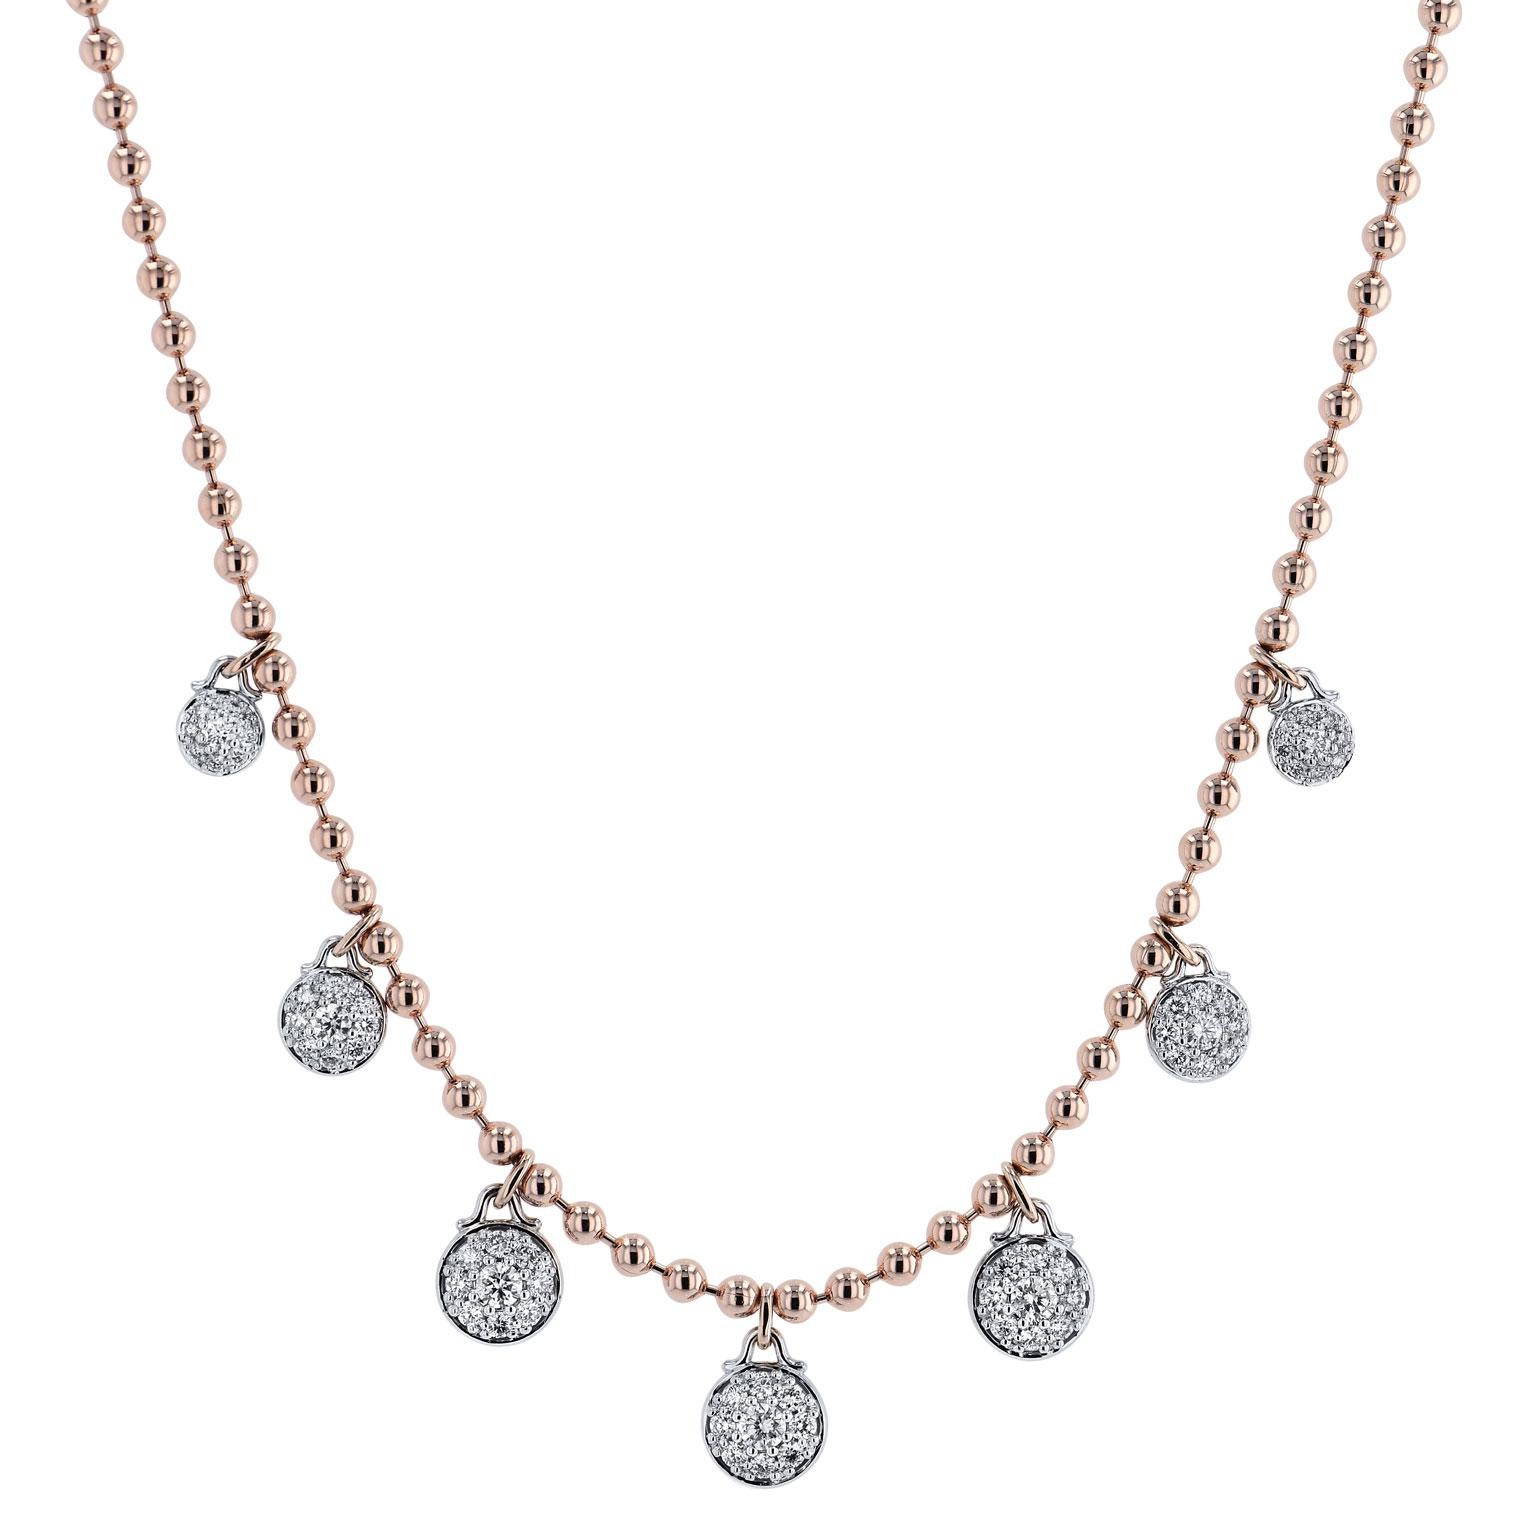 1.54 Carat Diamond Bezel-Set Swivel Drop Necklace

Exude flirty, fun with this 14 karat rose gold necklace featuring seven bezel-set drop diamonds on swivel. With a total weight of 1.54 carat and strung on 15.5 inch chain, make way for your new